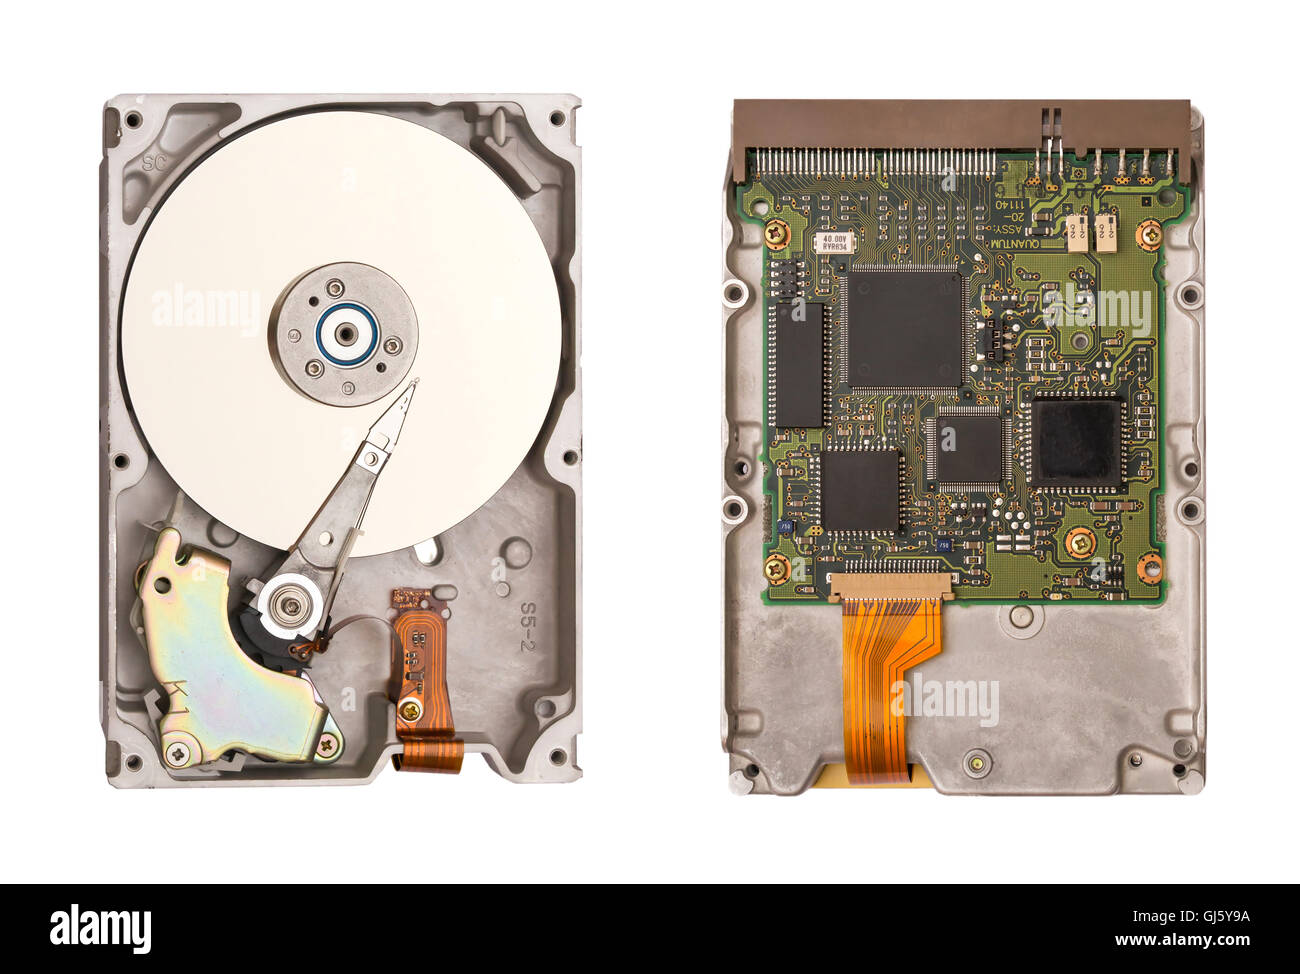 Hdd isolated on white background. Two sides of the hard disk. Computer chips. Inside of internal Harddrive. Stock Photo